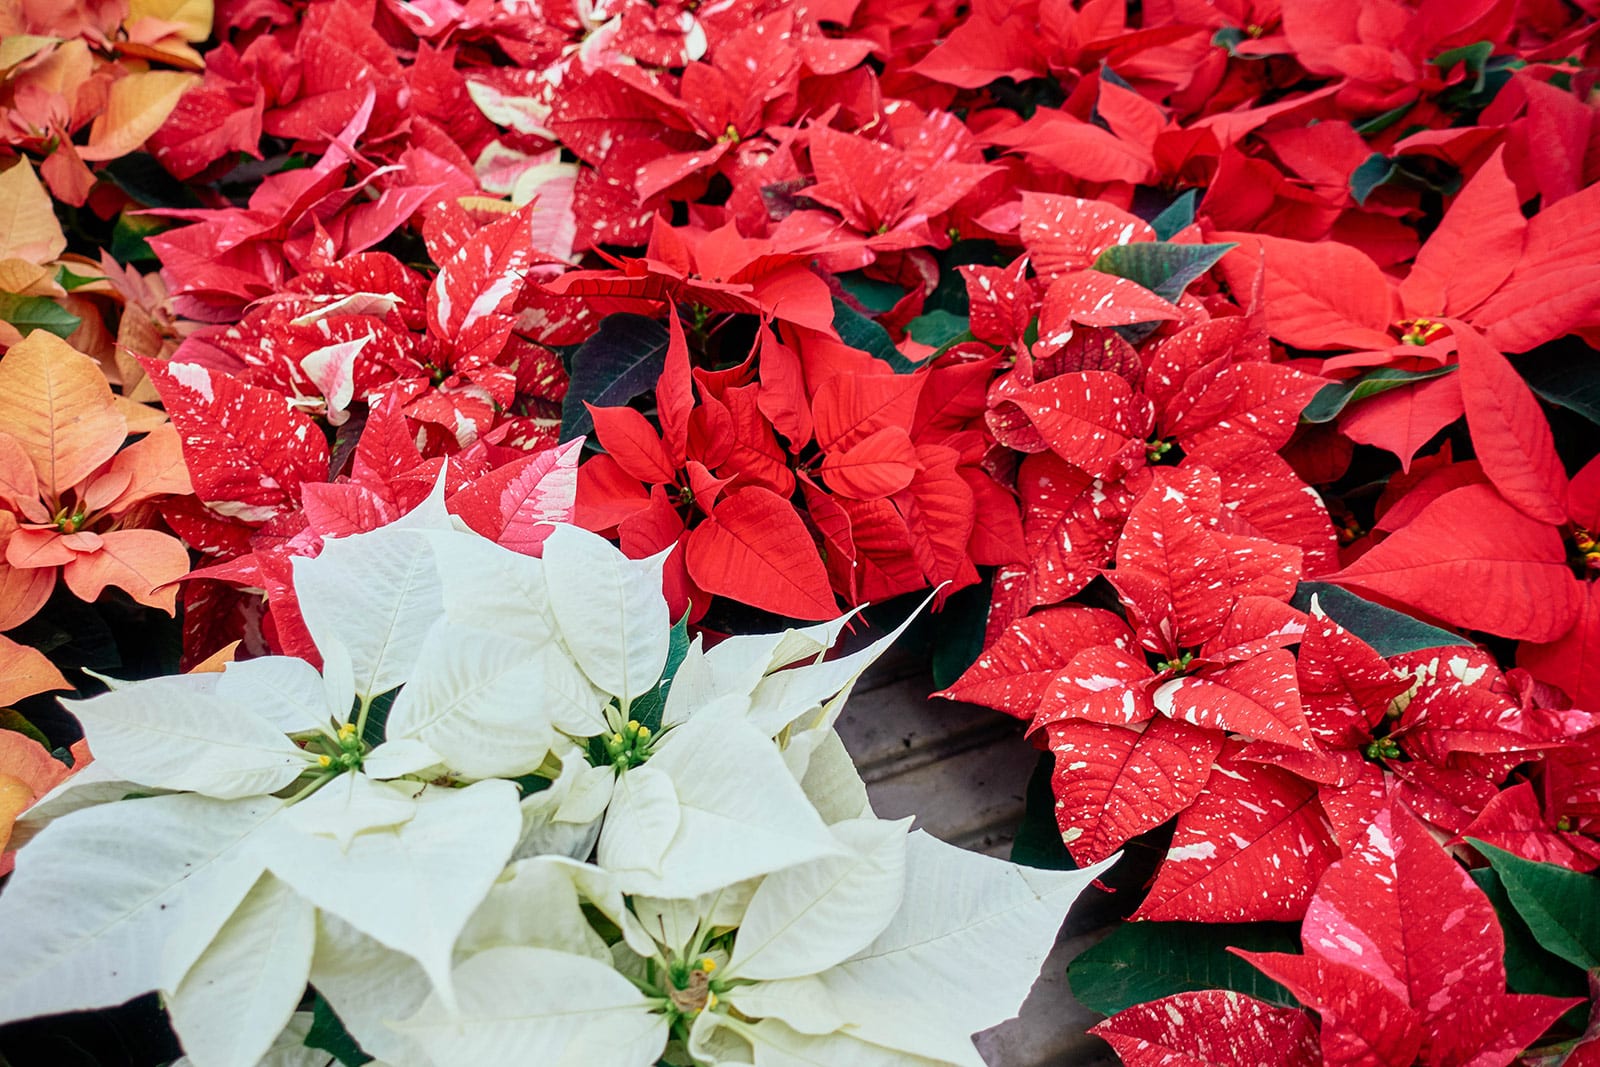 Group of white, red, salmon, and speckled poinsettia plants